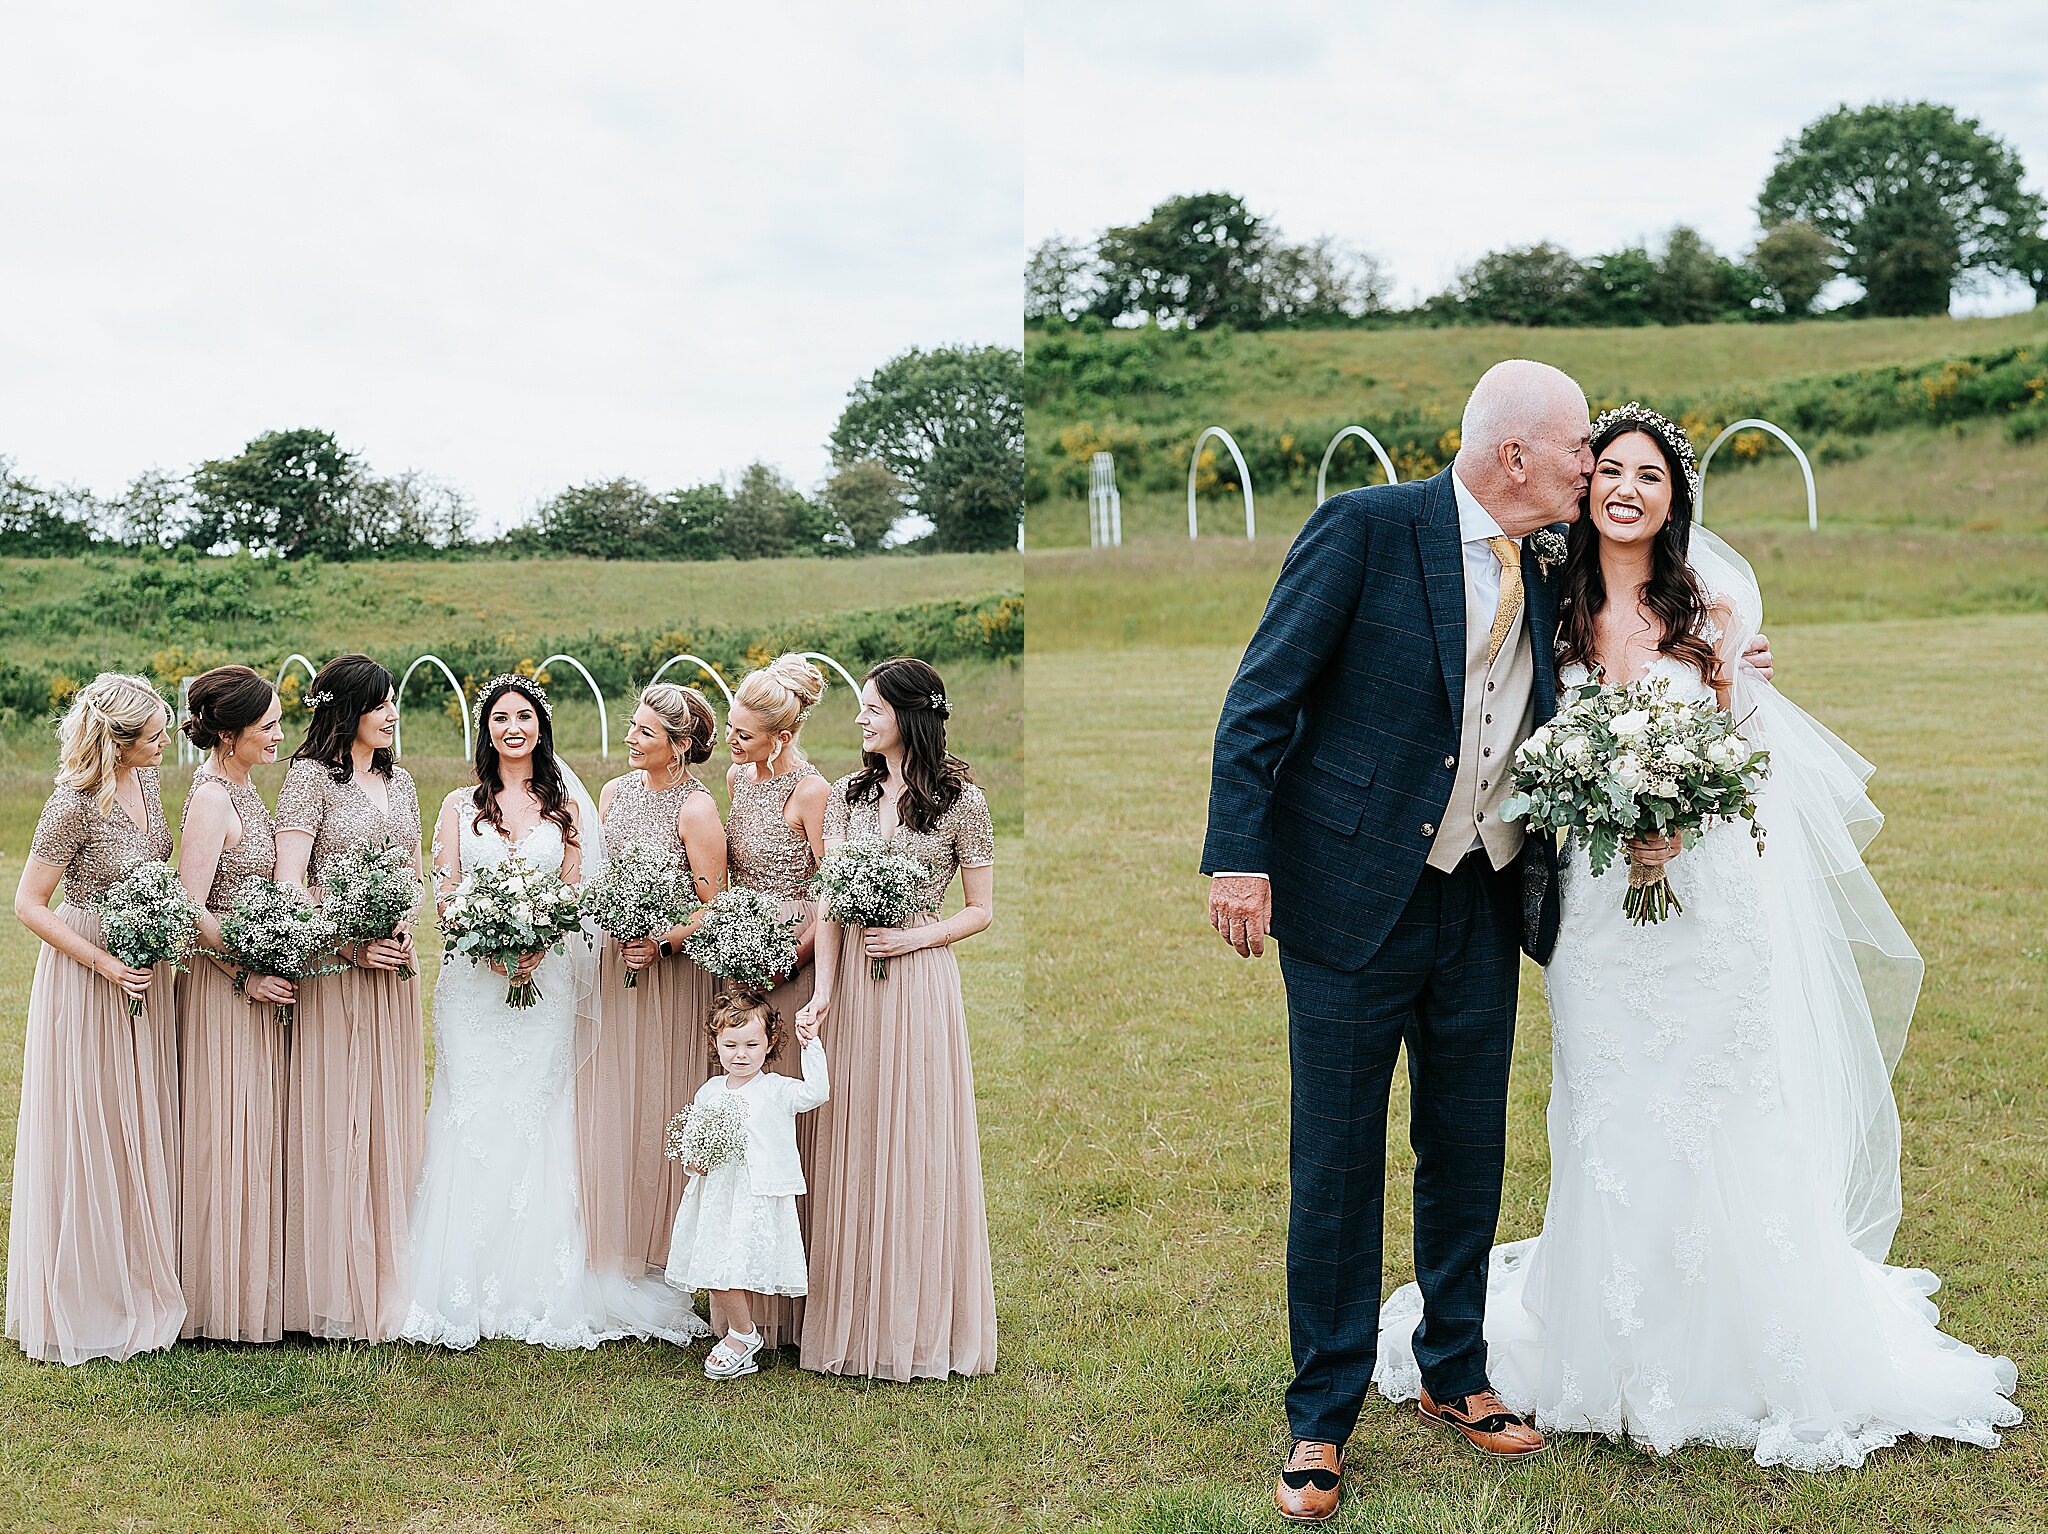 gorgeous rustic wedding at delamere wedding events 